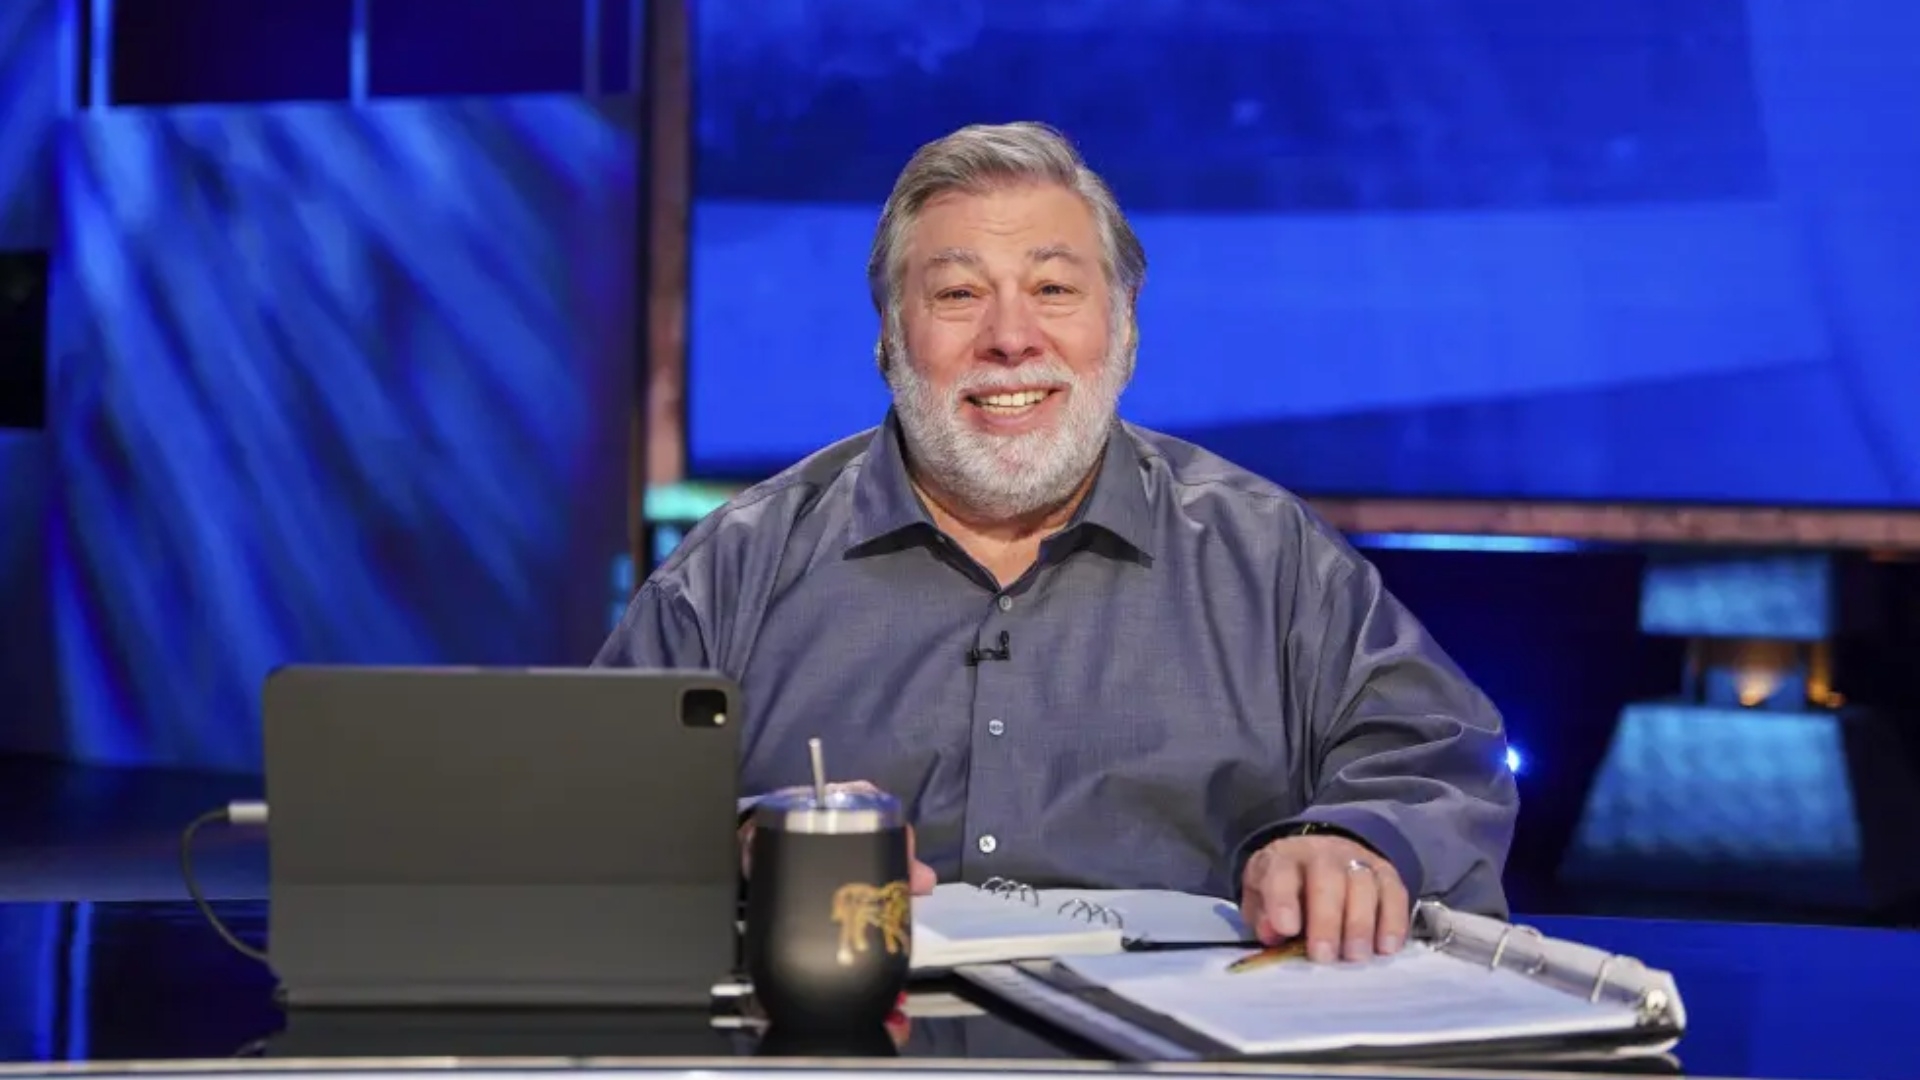 Steve Wozniak Cancels Participation in World Business Forum Due to Stroke